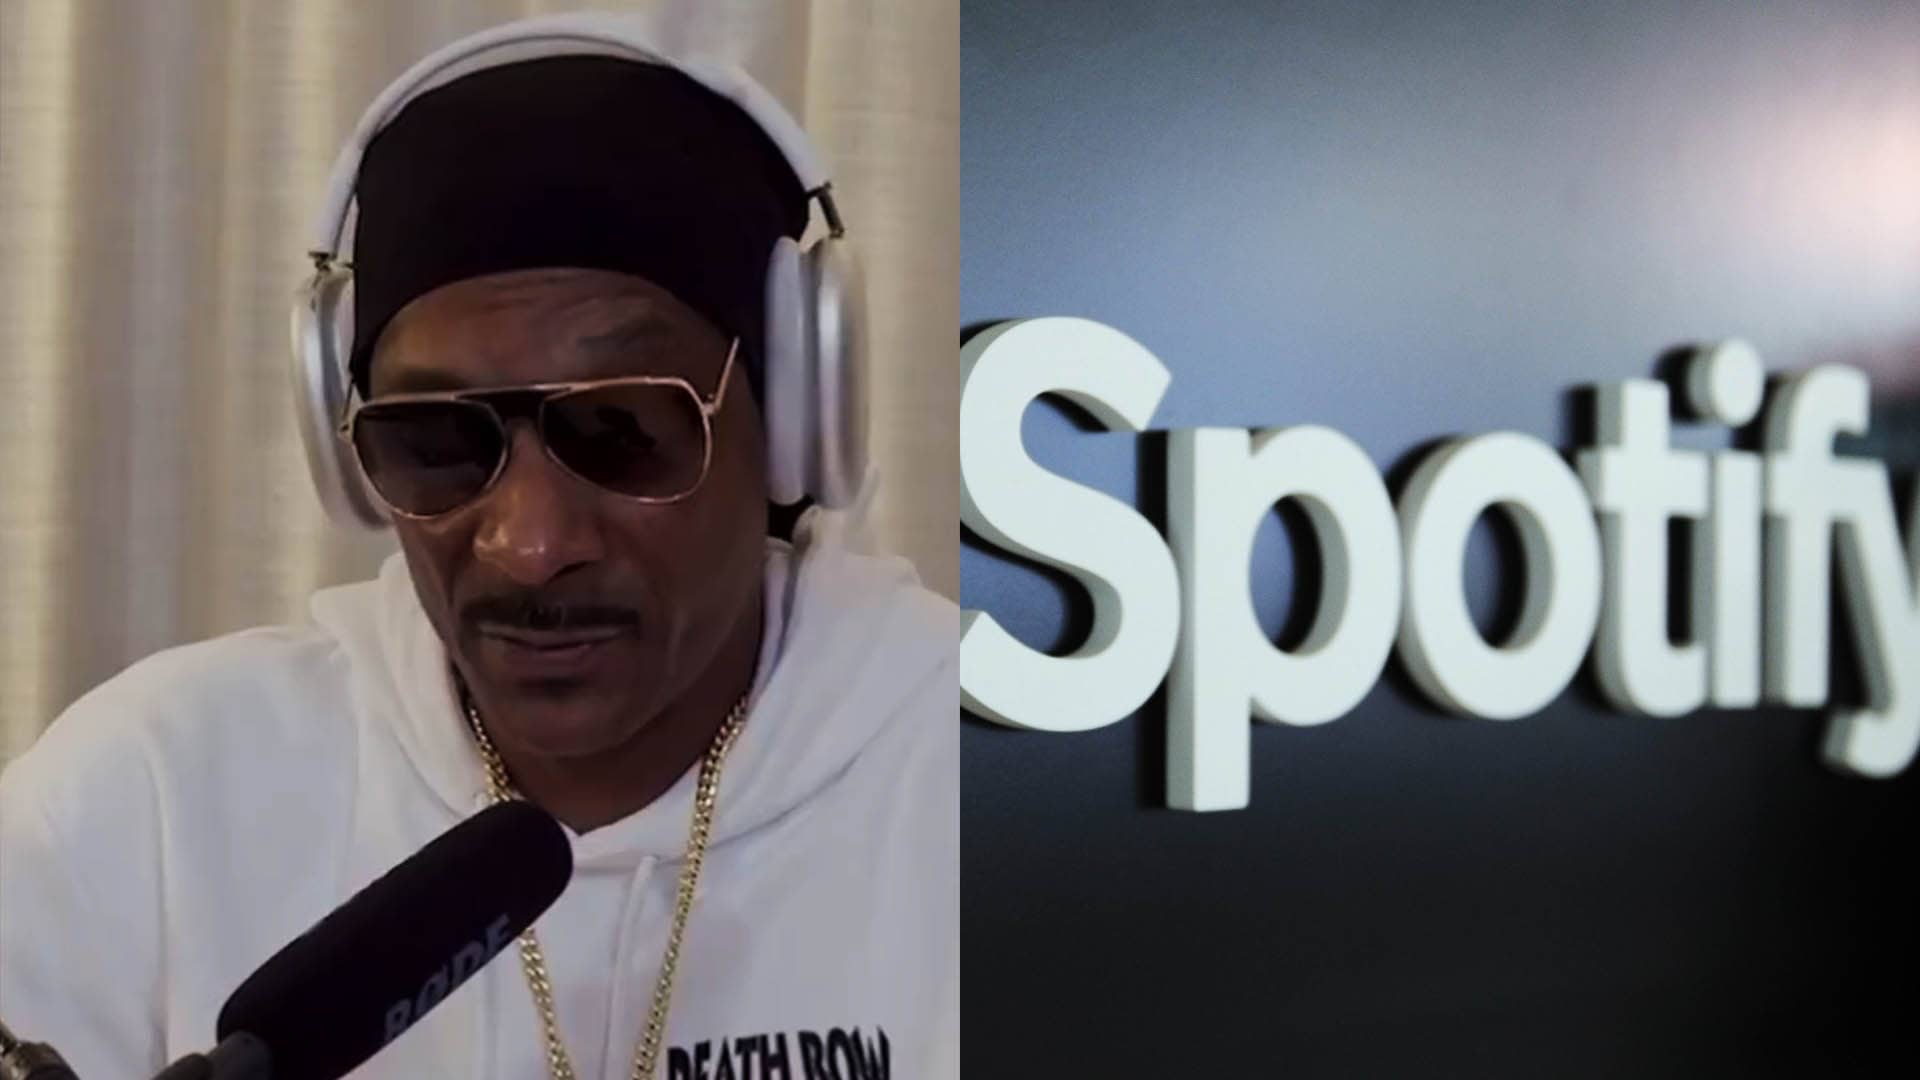 Snoop Dogg with headphones representing his Spotify earnings story